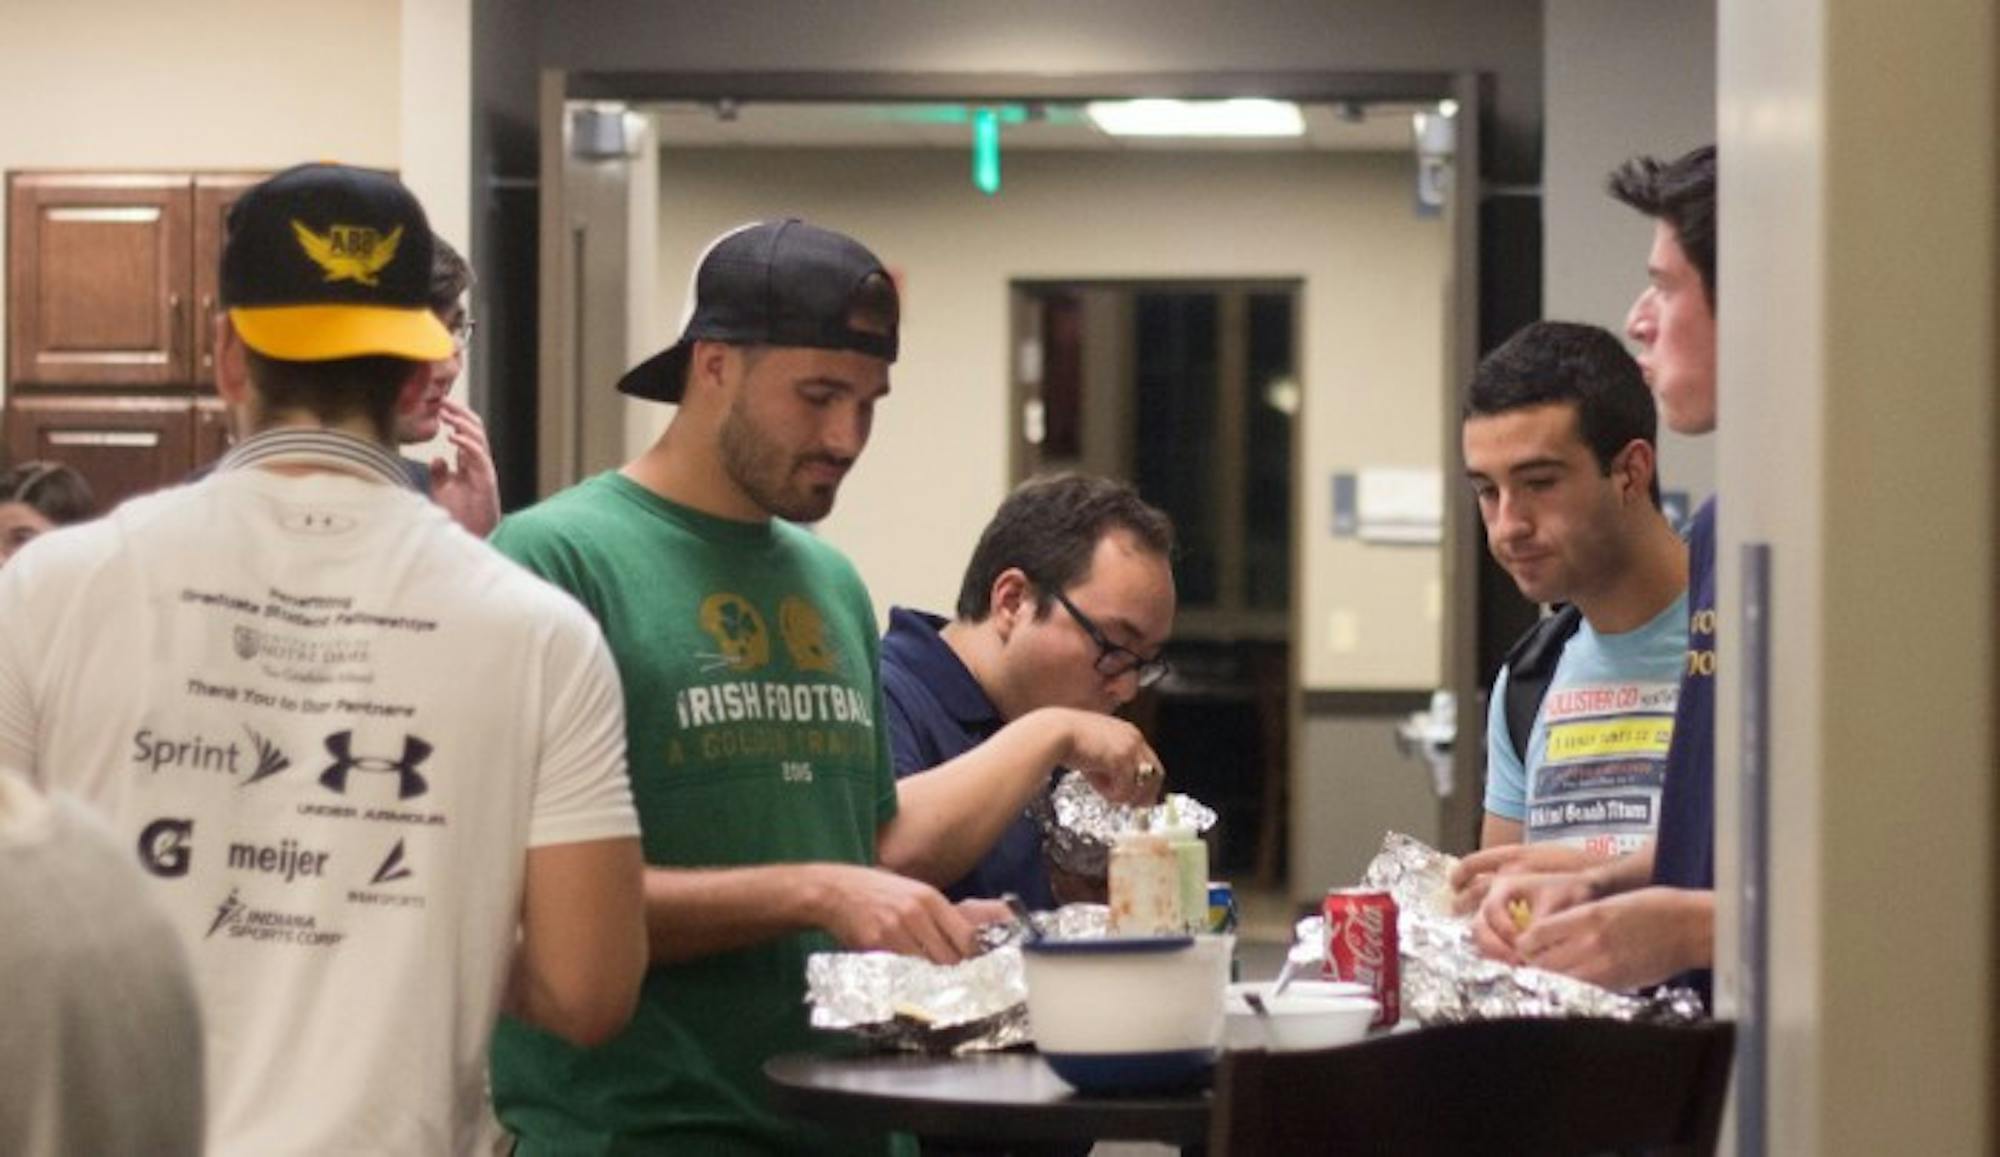 Students enjoy tacos in Dunne Hall on Thursday for the grand opening of Dungeon Tacos.